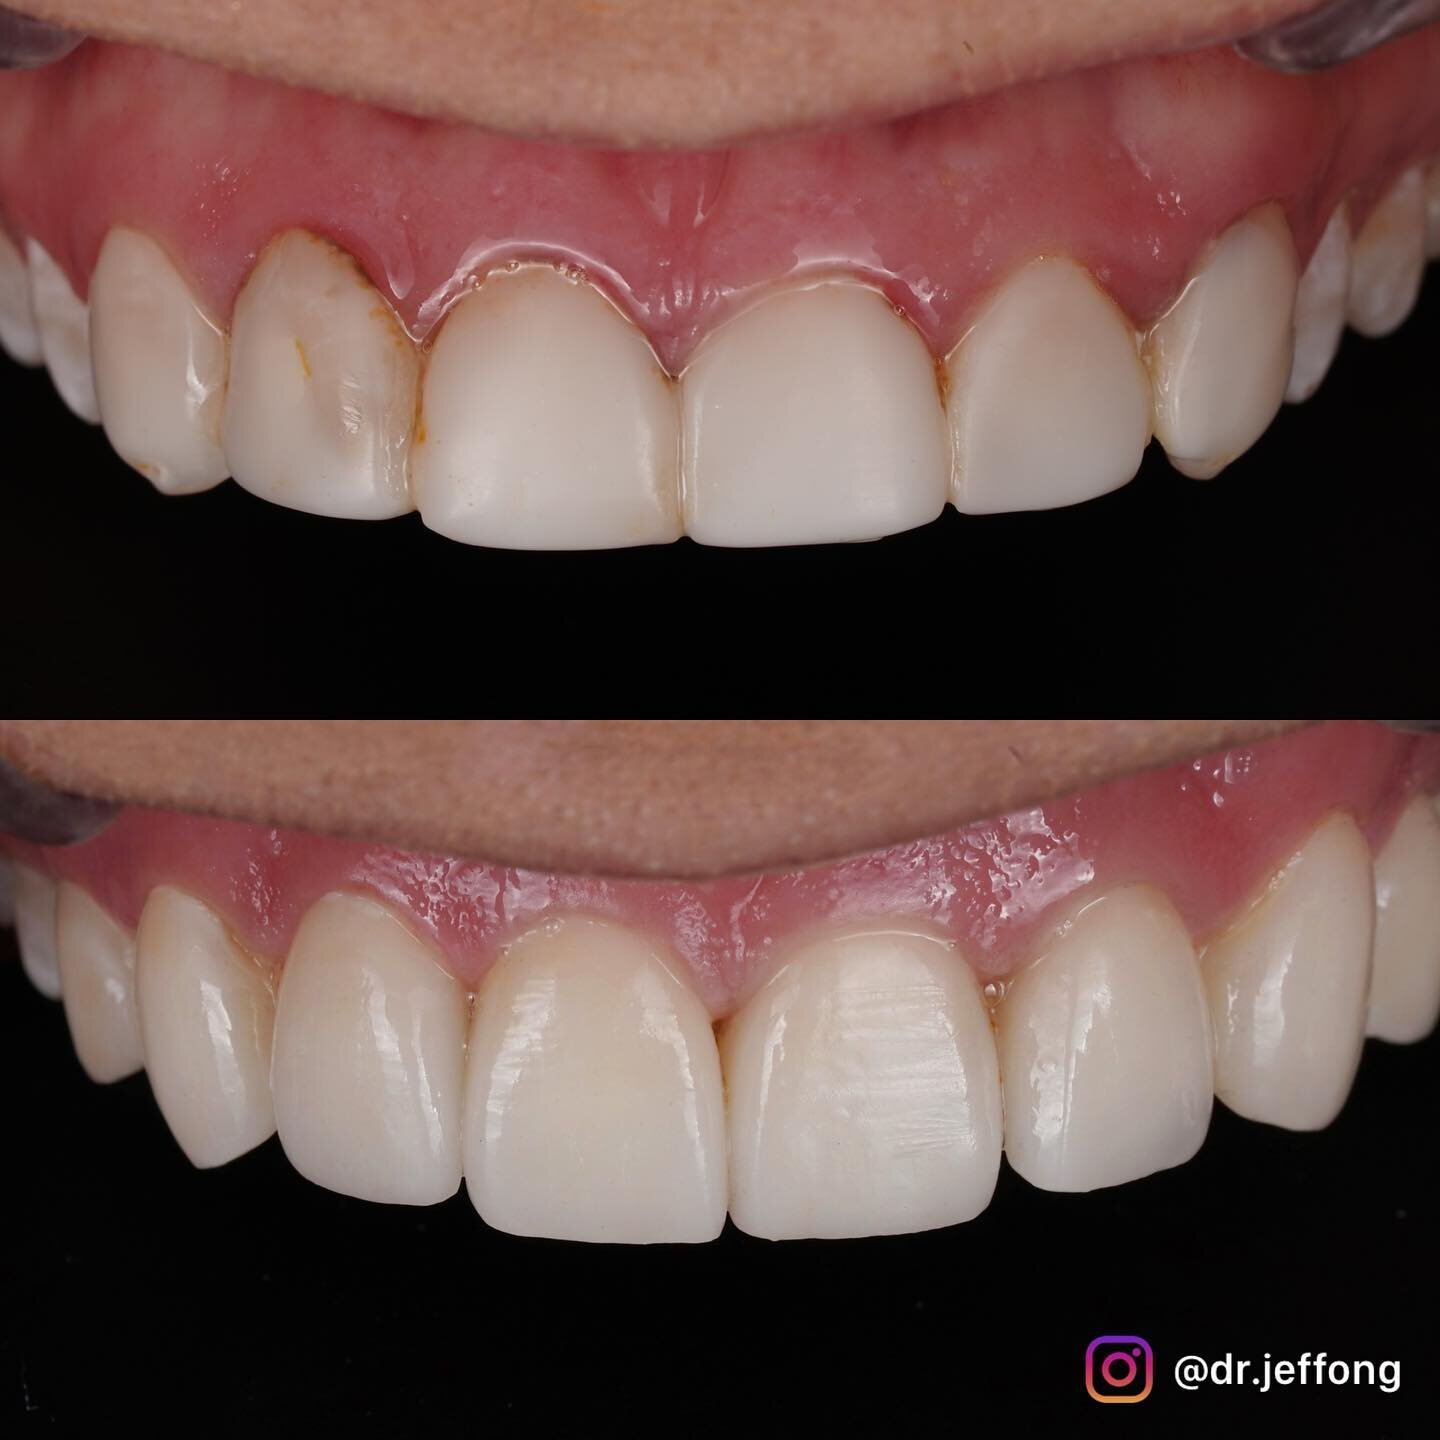 8 units of ceramic veneers to rejuvenate this patient&rsquo;s smile

Patient was initially referred to me because of her gum problem around her existing composite veneers. She was otherwise quite happy with them in terms of appearance. 

Gingivectomy